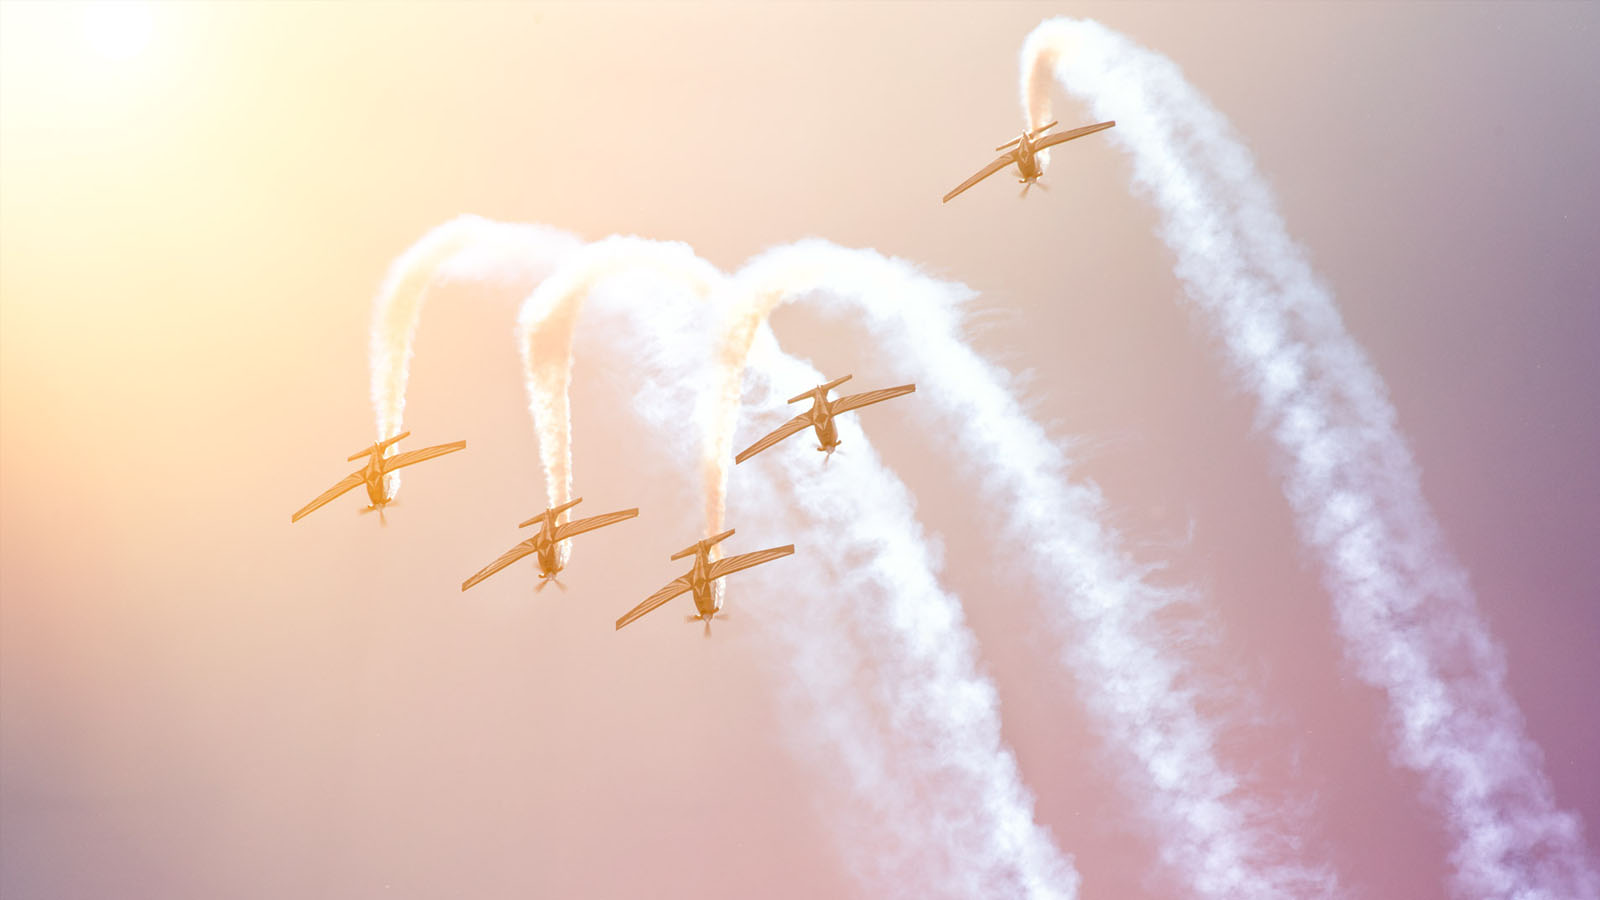 Formation of five inverted aerobatic aircraft.